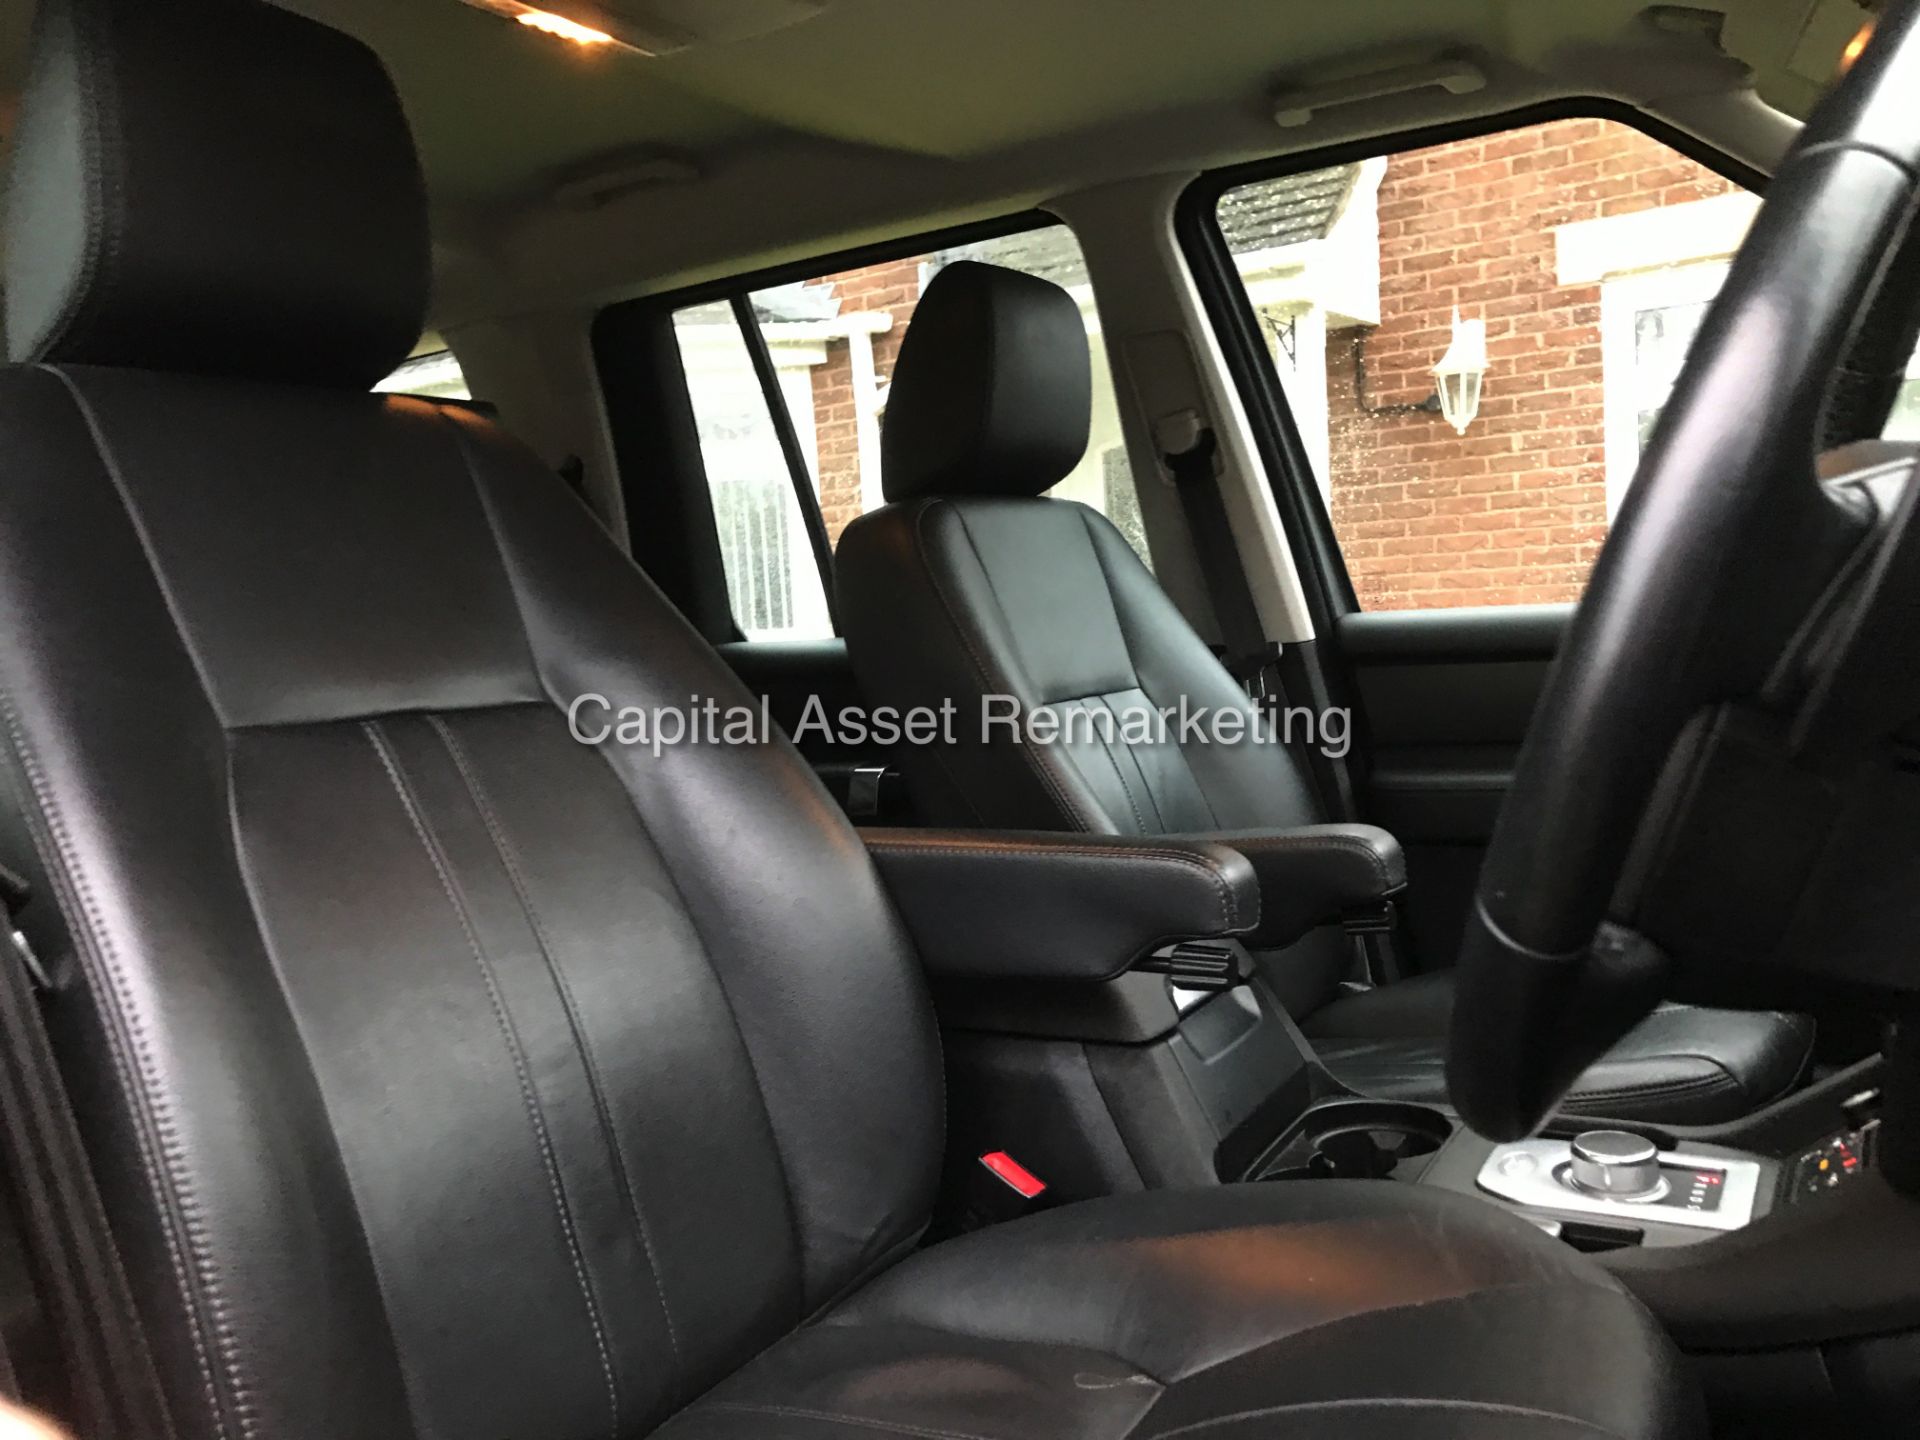 LANDROVER DISCOVERY 3.0 "SDV6 - XS" AUTO (2013 MODEL) 1 OWNER - LOW MILES / FSH - NAV - LEATHER - Image 10 of 21